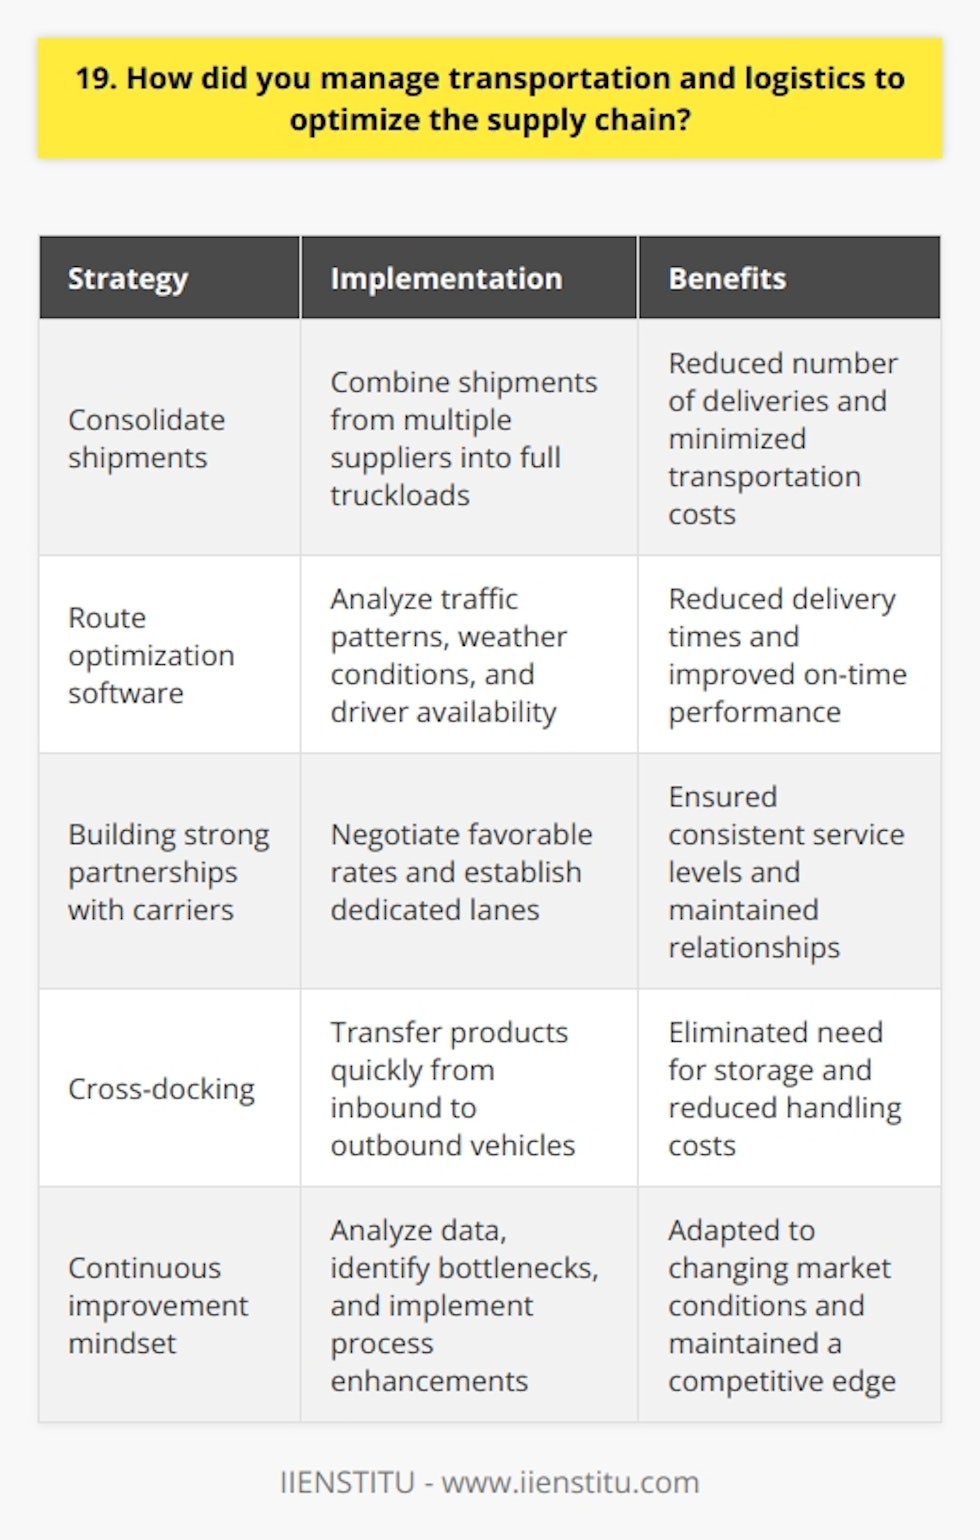 During my tenure as a supply chain manager, I implemented several strategies to optimize transportation and logistics. One of the key initiatives was to  consolidate shipments  from multiple suppliers into full truckloads. This reduced the number of deliveries and minimized transportation costs. Leveraging Technology I also leveraged  route optimization software  to determine the most efficient delivery routes. By analyzing factors like traffic patterns, weather conditions, and driver availability, we were able to  reduce delivery times  and improve on-time performance. Building Strong Partnerships Another crucial aspect was  building strong partnerships with carriers . I negotiated favorable rates and established dedicated lanes to ensure consistent service levels. Regular performance reviews and open communication helped maintain these relationships. Implementing Cross-Docking To further streamline operations, I introduced  cross-docking  at our distribution centers. This eliminated the need for storage and reduced handling costs. Products were quickly transferred from inbound to outbound vehicles, improving efficiency. Continuous Improvement Throughout my experience, I embraced a  continuous improvement mindset . I regularly analyzed data, identified bottlenecks, and implemented process enhancements. This proactive approach allowed us to adapt to changing market conditions and maintain a competitive edge. By combining strategic planning, technology adoption, and collaborative partnerships, I successfully  optimized transportation and logistics  within the supply chain. These efforts led to significant cost savings, improved service levels, and enhanced overall operational efficiency.